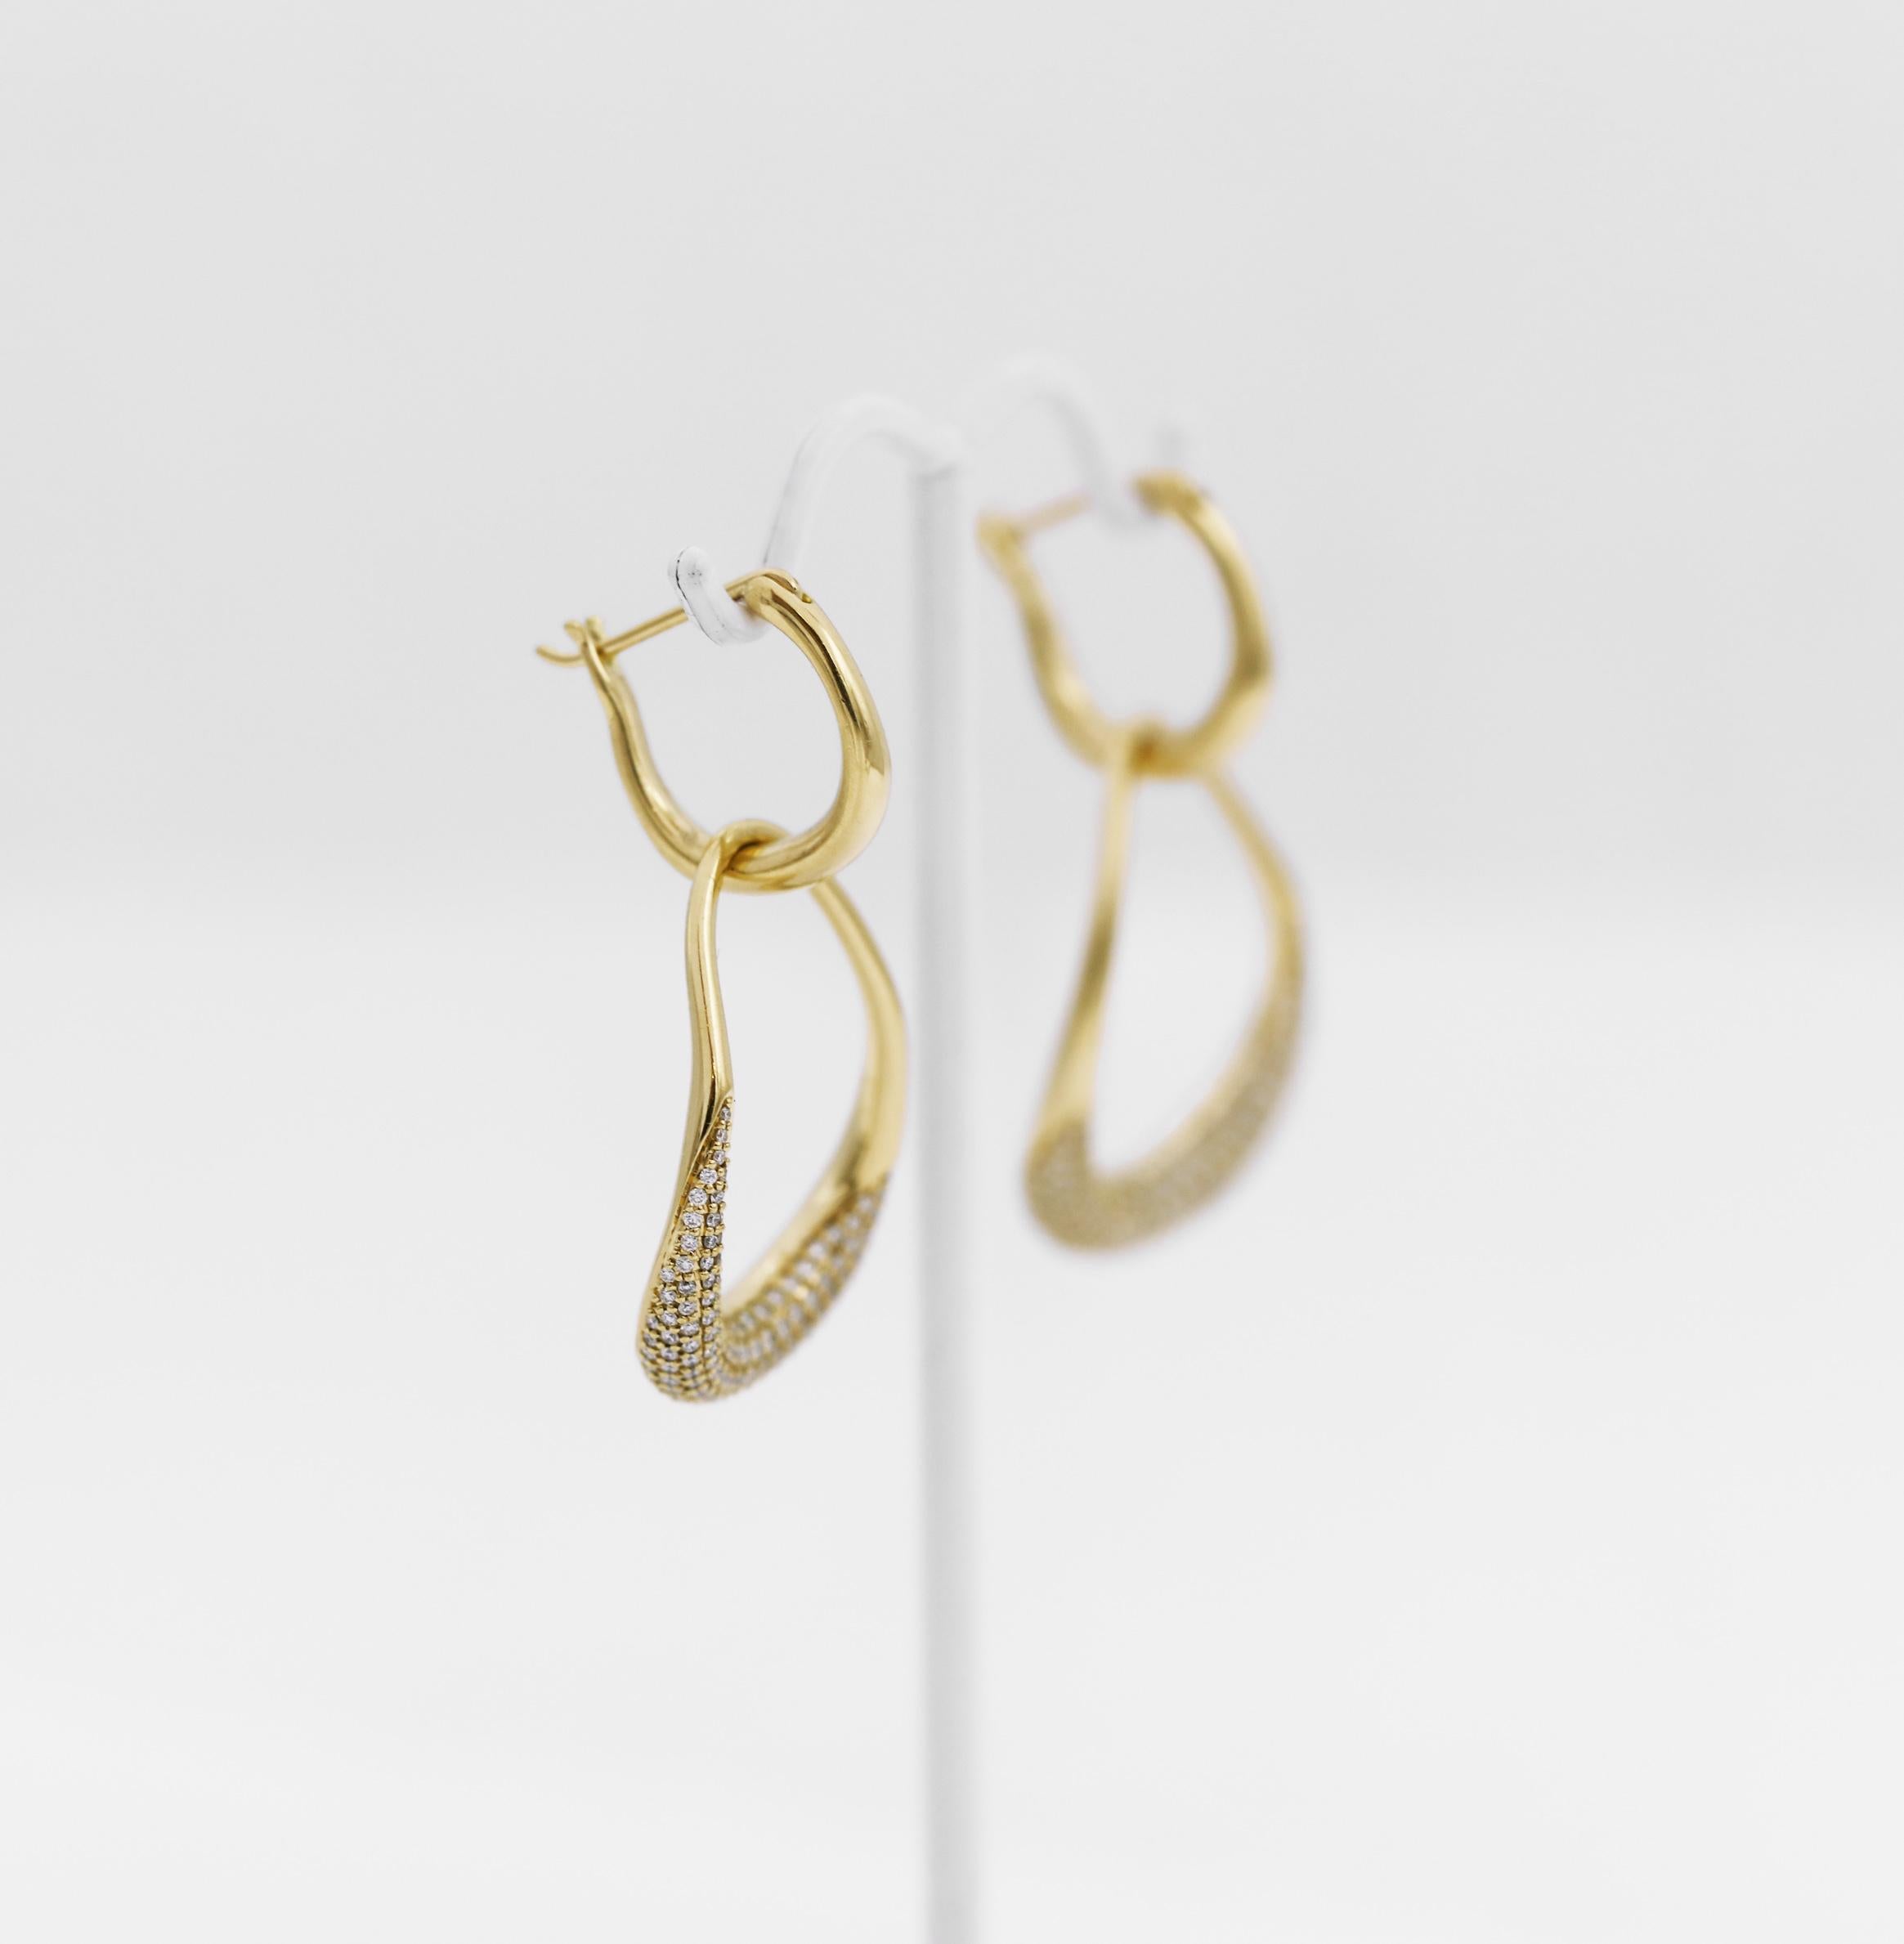 GEORG JENSEN 
These Offspring earrings tell the fantastic story of the unbreakable bond between mother and child.
Two exquisite rings are interlocked, the large ring protecting the small one, in a timeless and emotional tribute to the strength of a